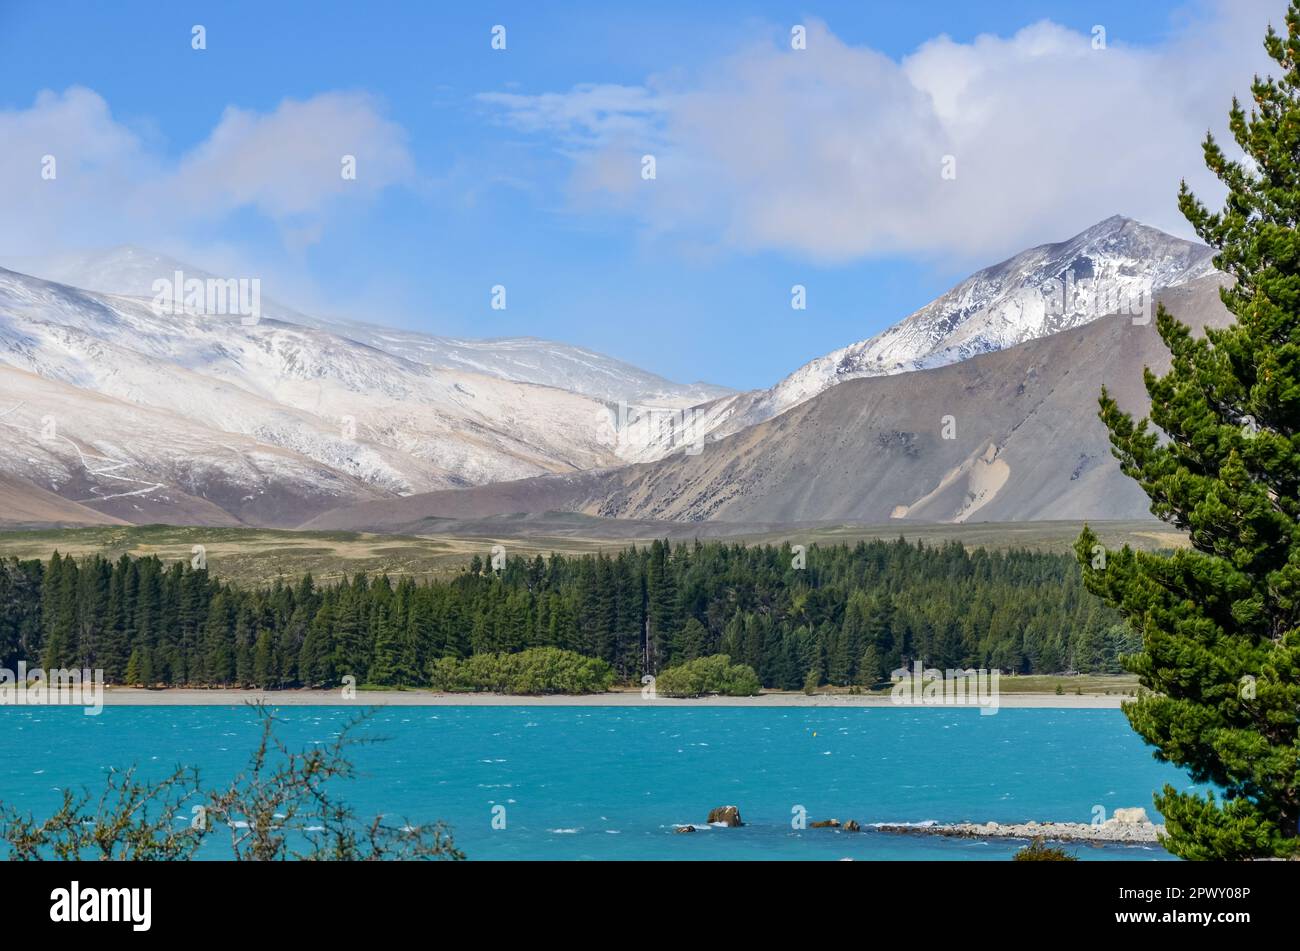 Lake Tekapo is framed by Snow-Capped Mountain Peaks in New Zealand Stock Photo